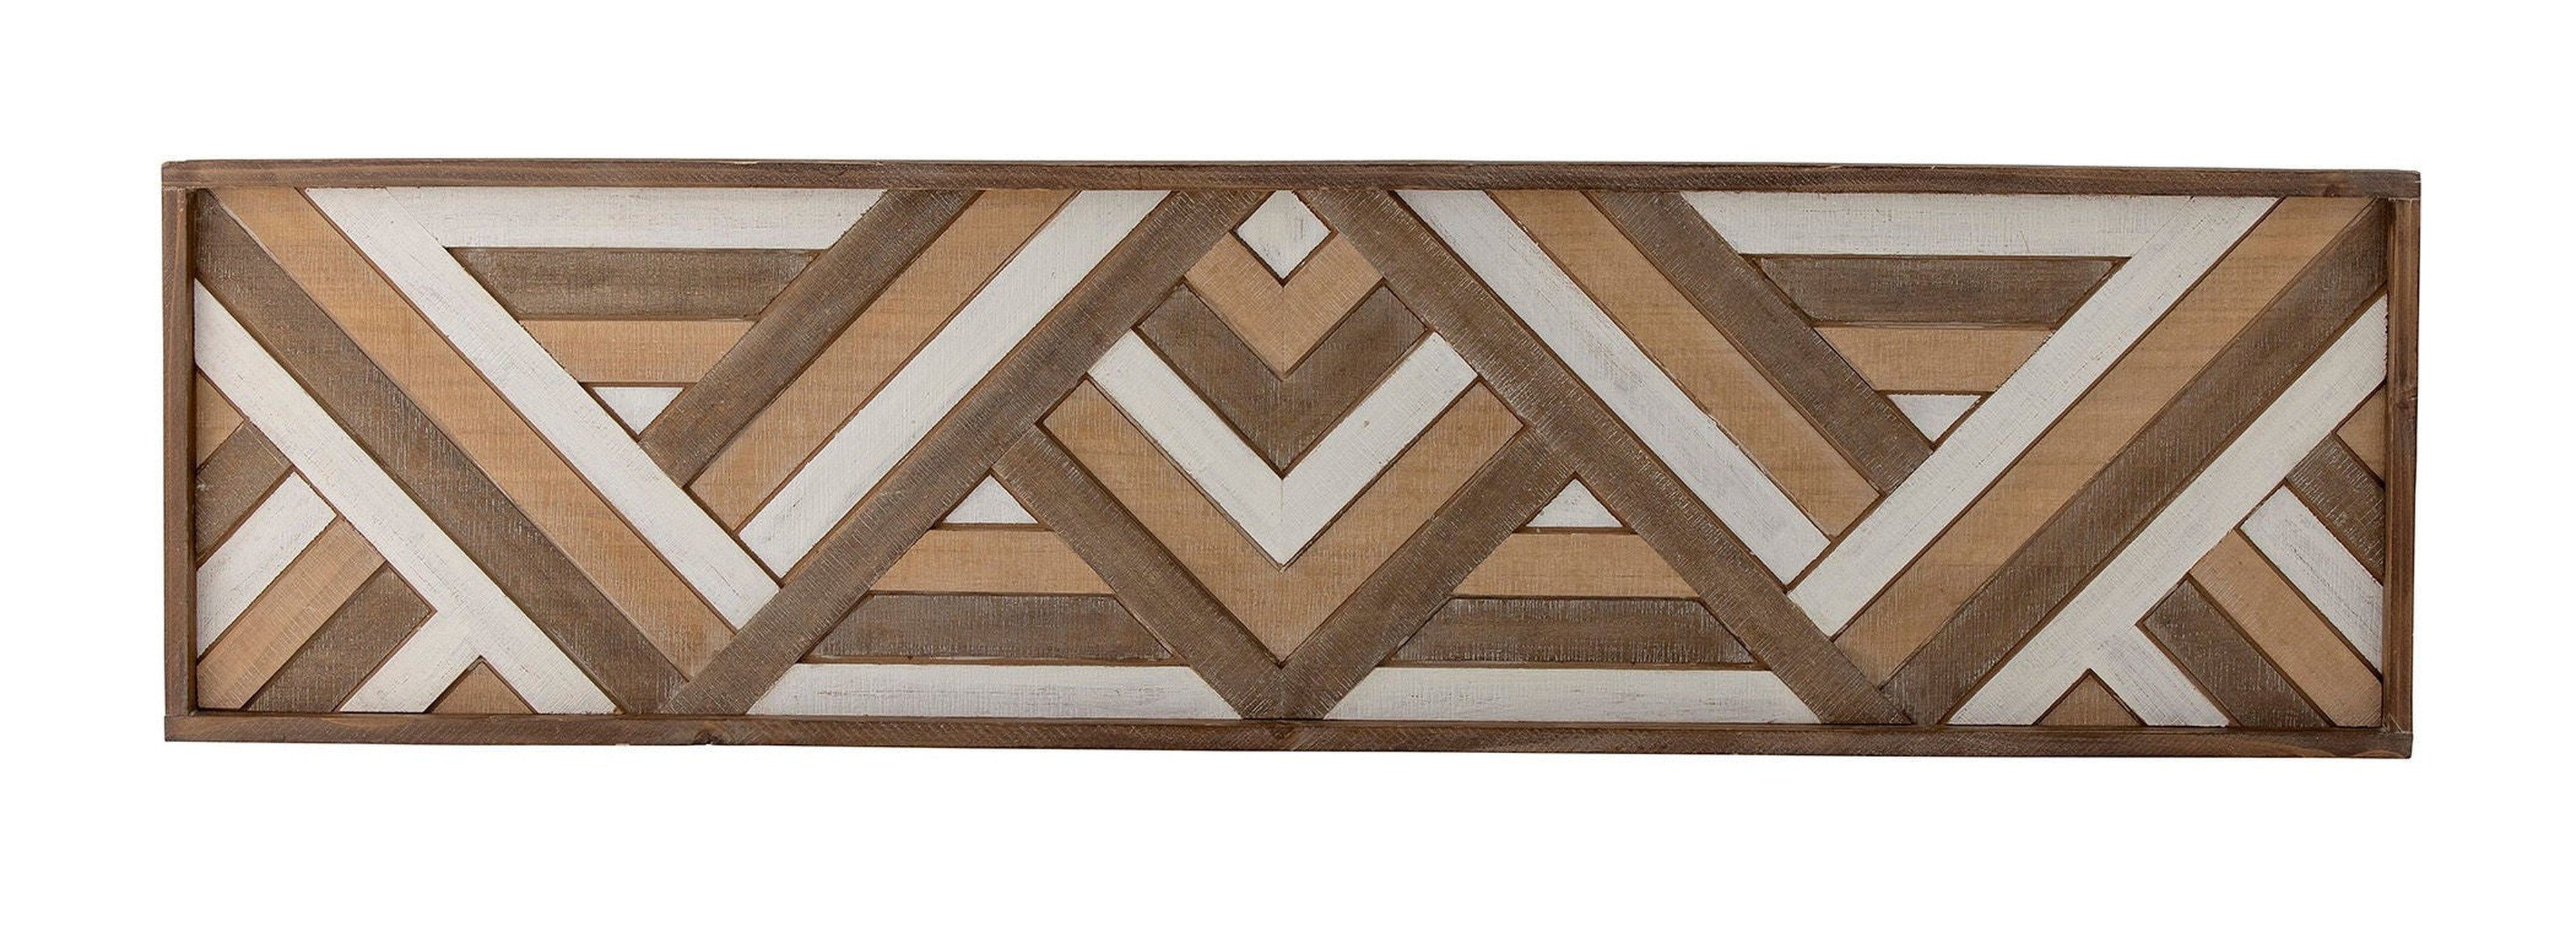 Creative Collection Lunna Wall Decor, Brown, MDF